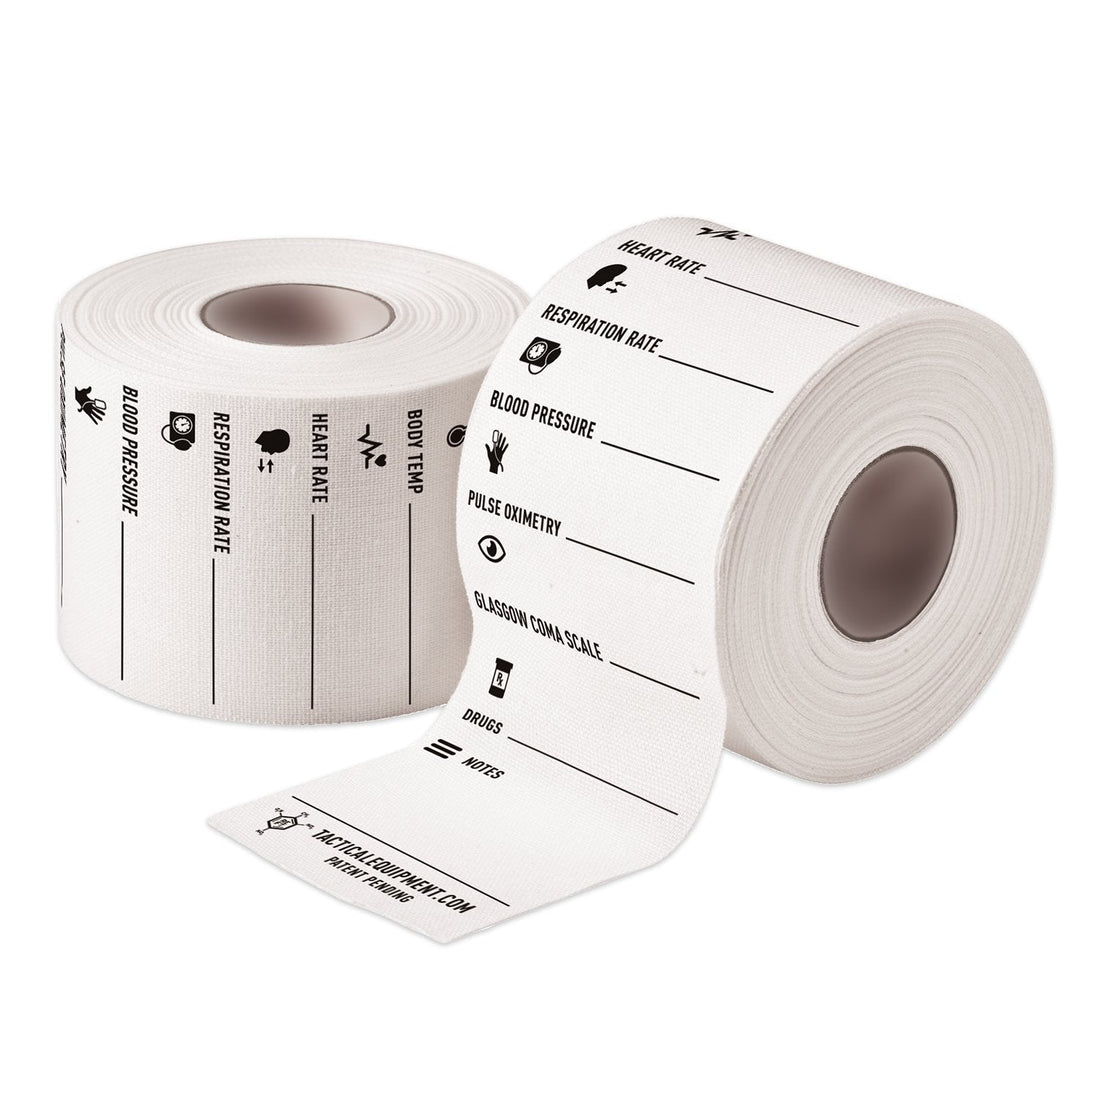 Supplies - Medical - Information - RE Factor Tactical Trauma Tape